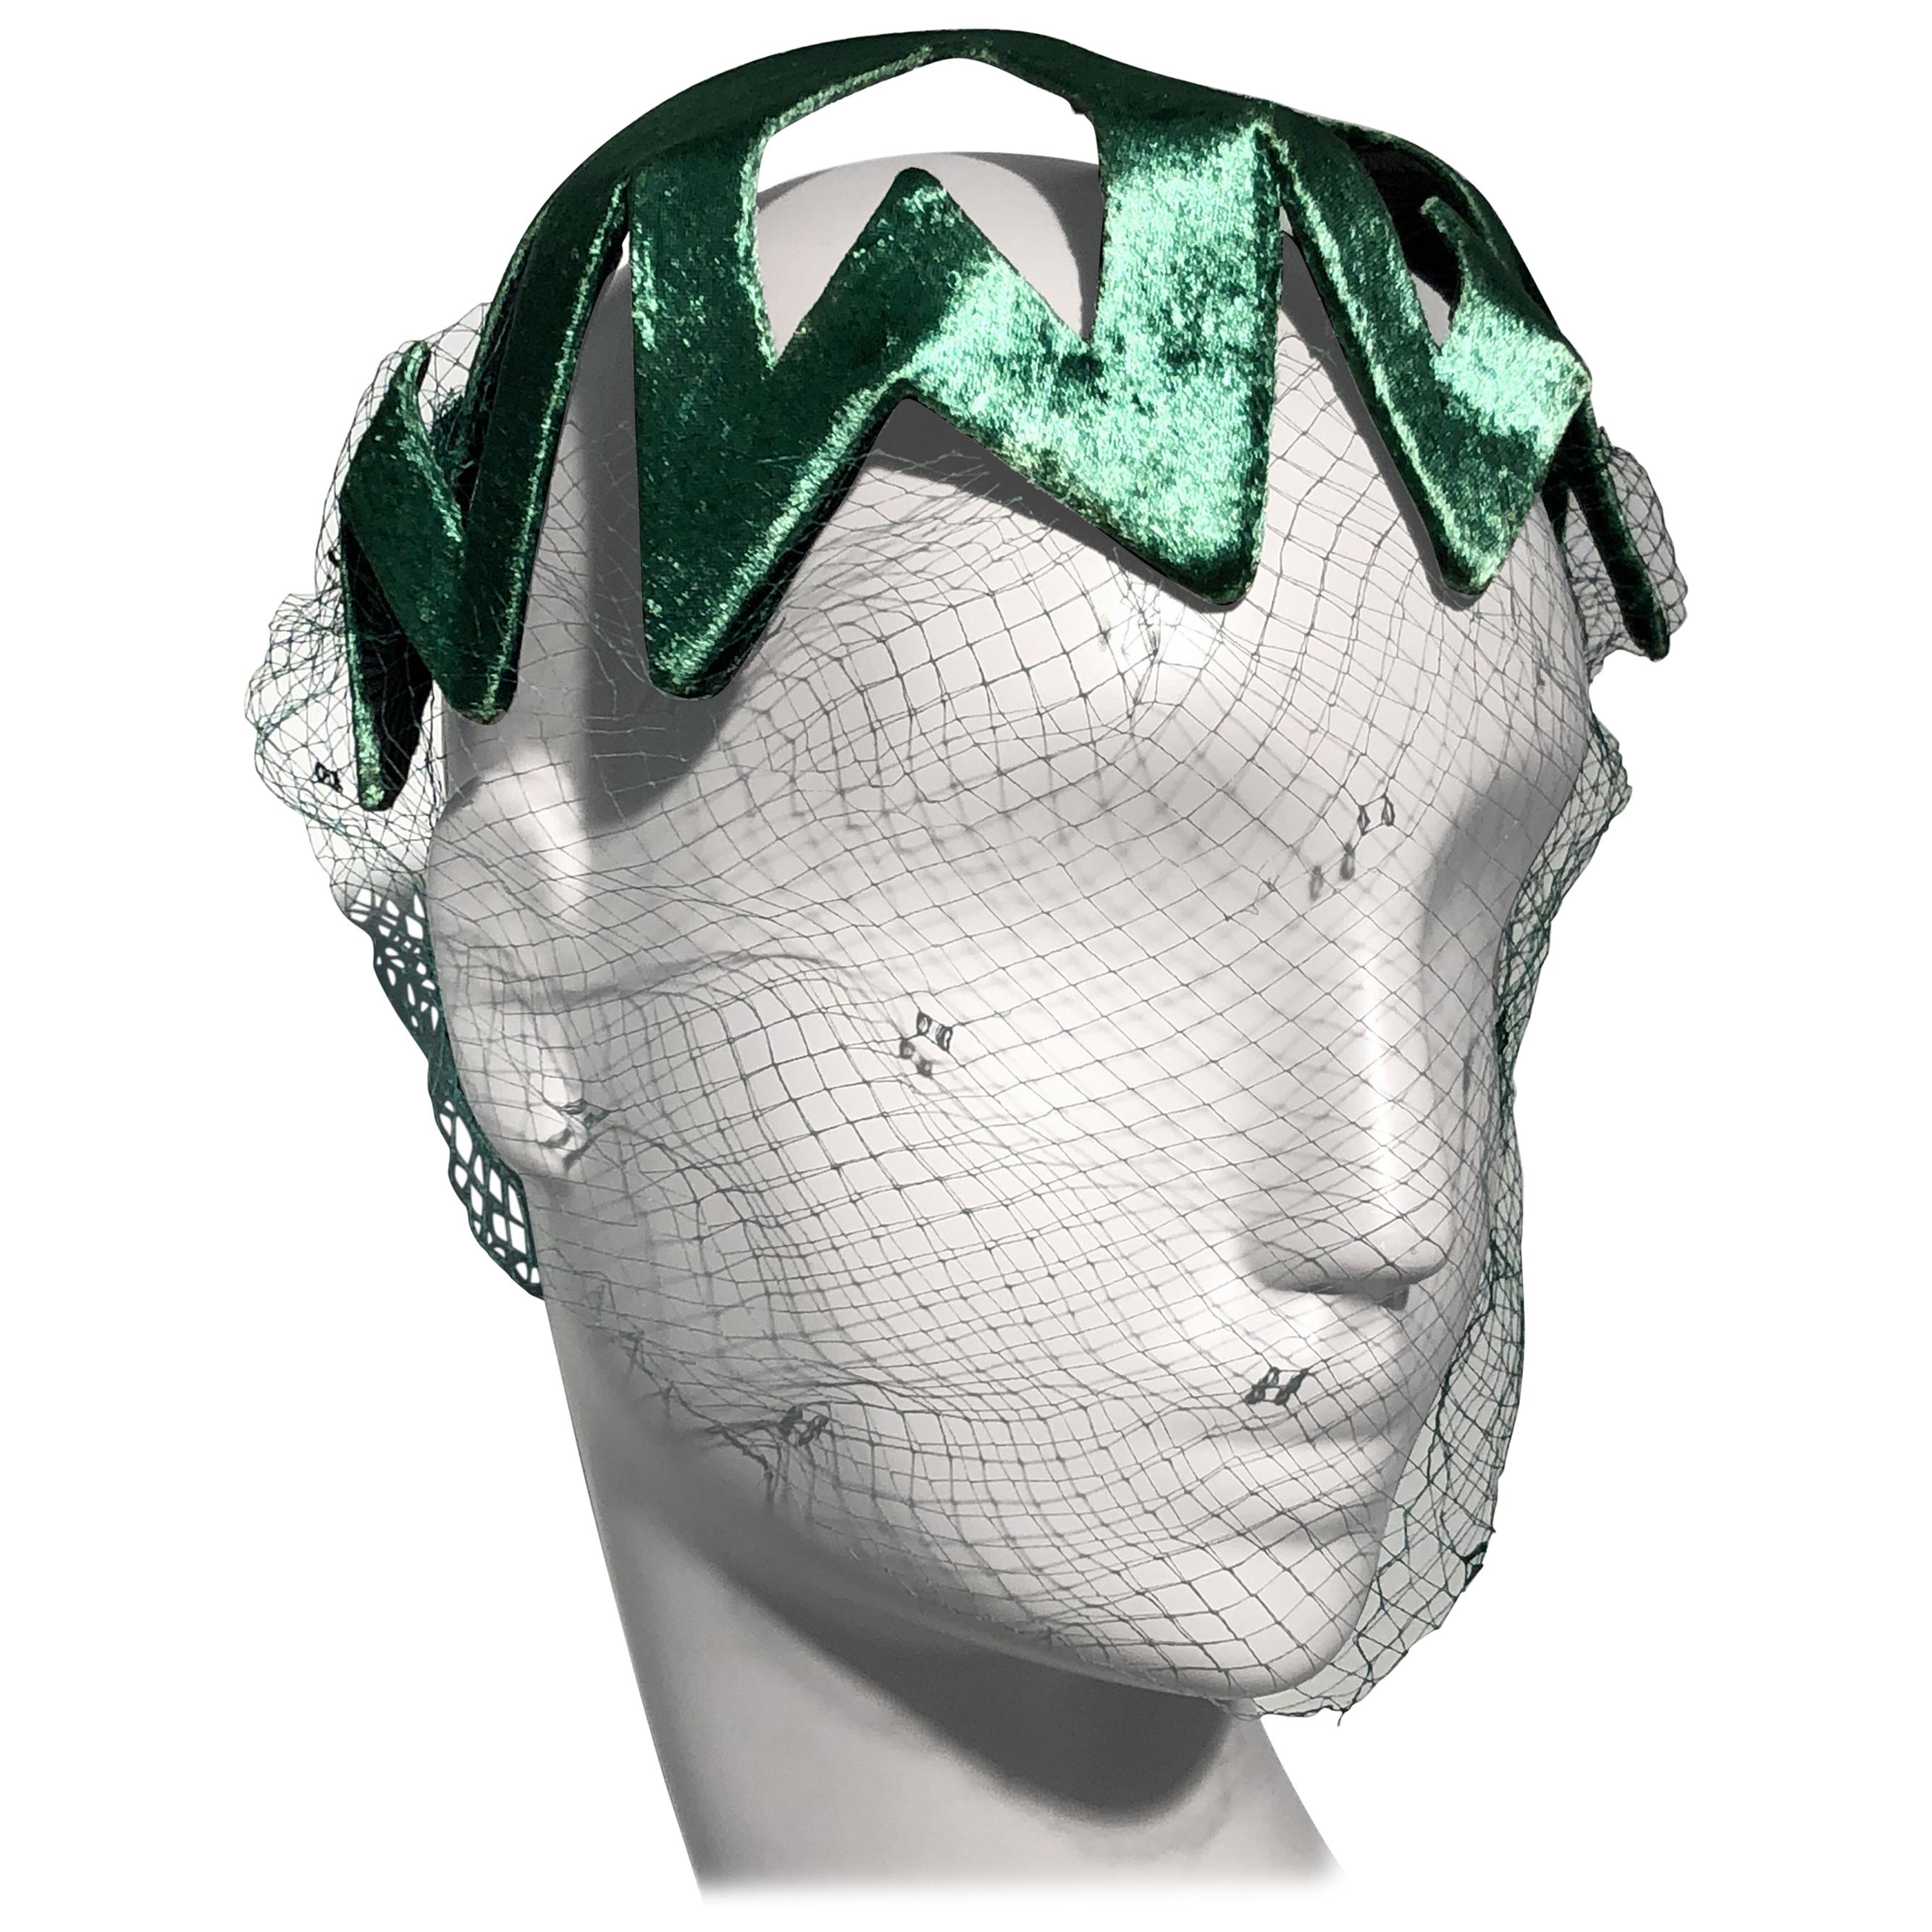 1950s Japanese Emerald Green Satin Zig Zag Graphic Hat W/ Dotted Veil